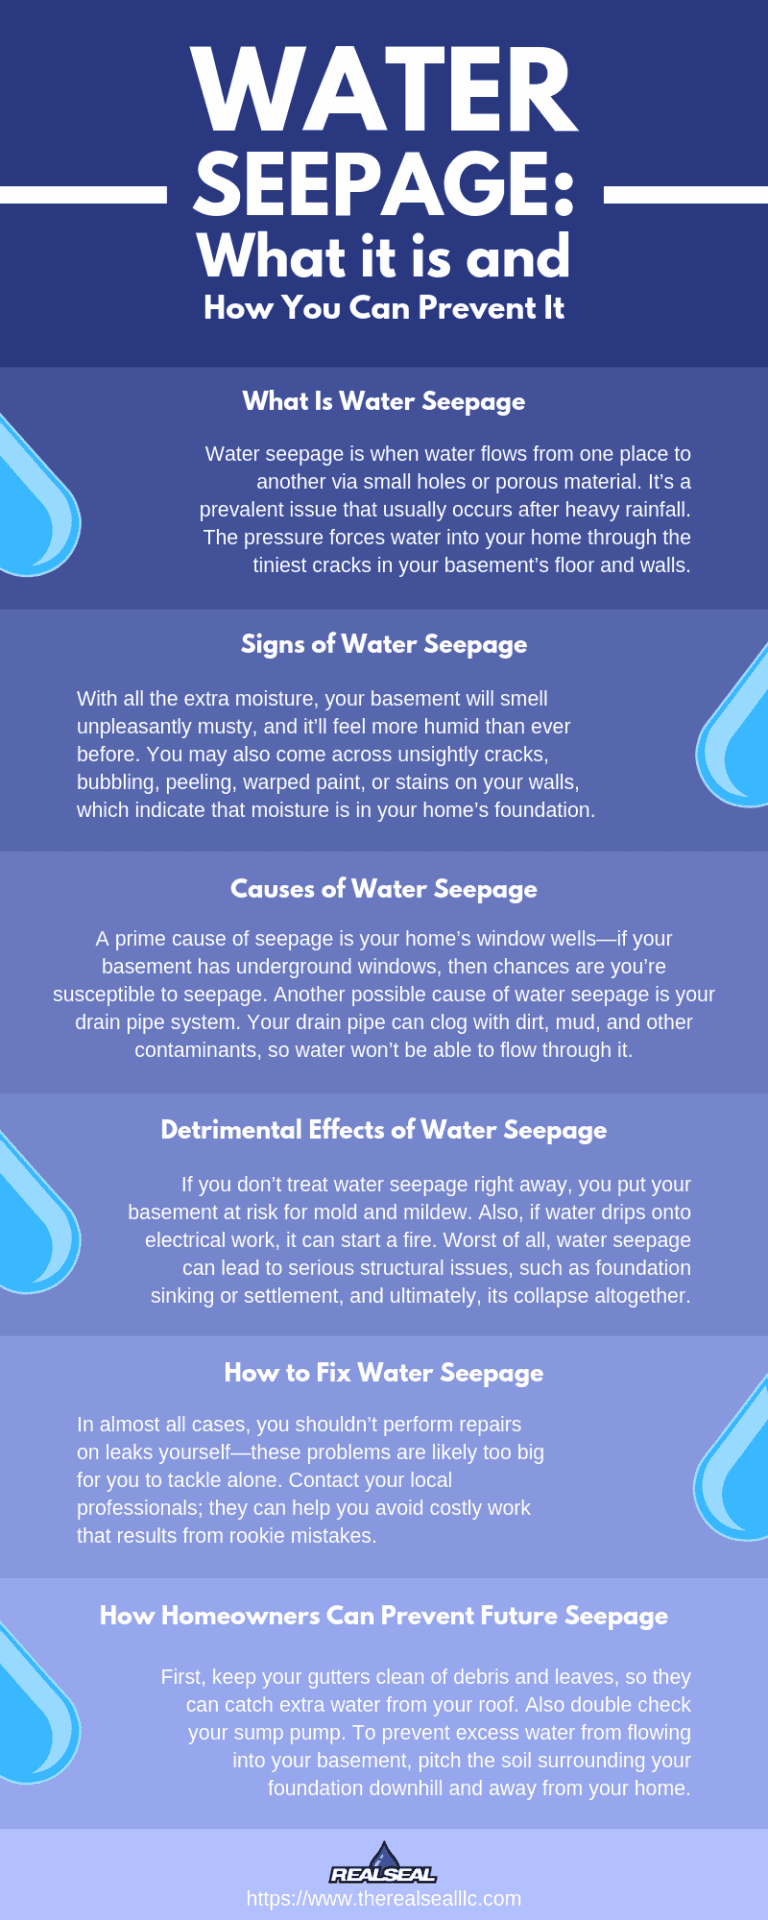 Water Seepage: What It Is and How You Can Prevent It